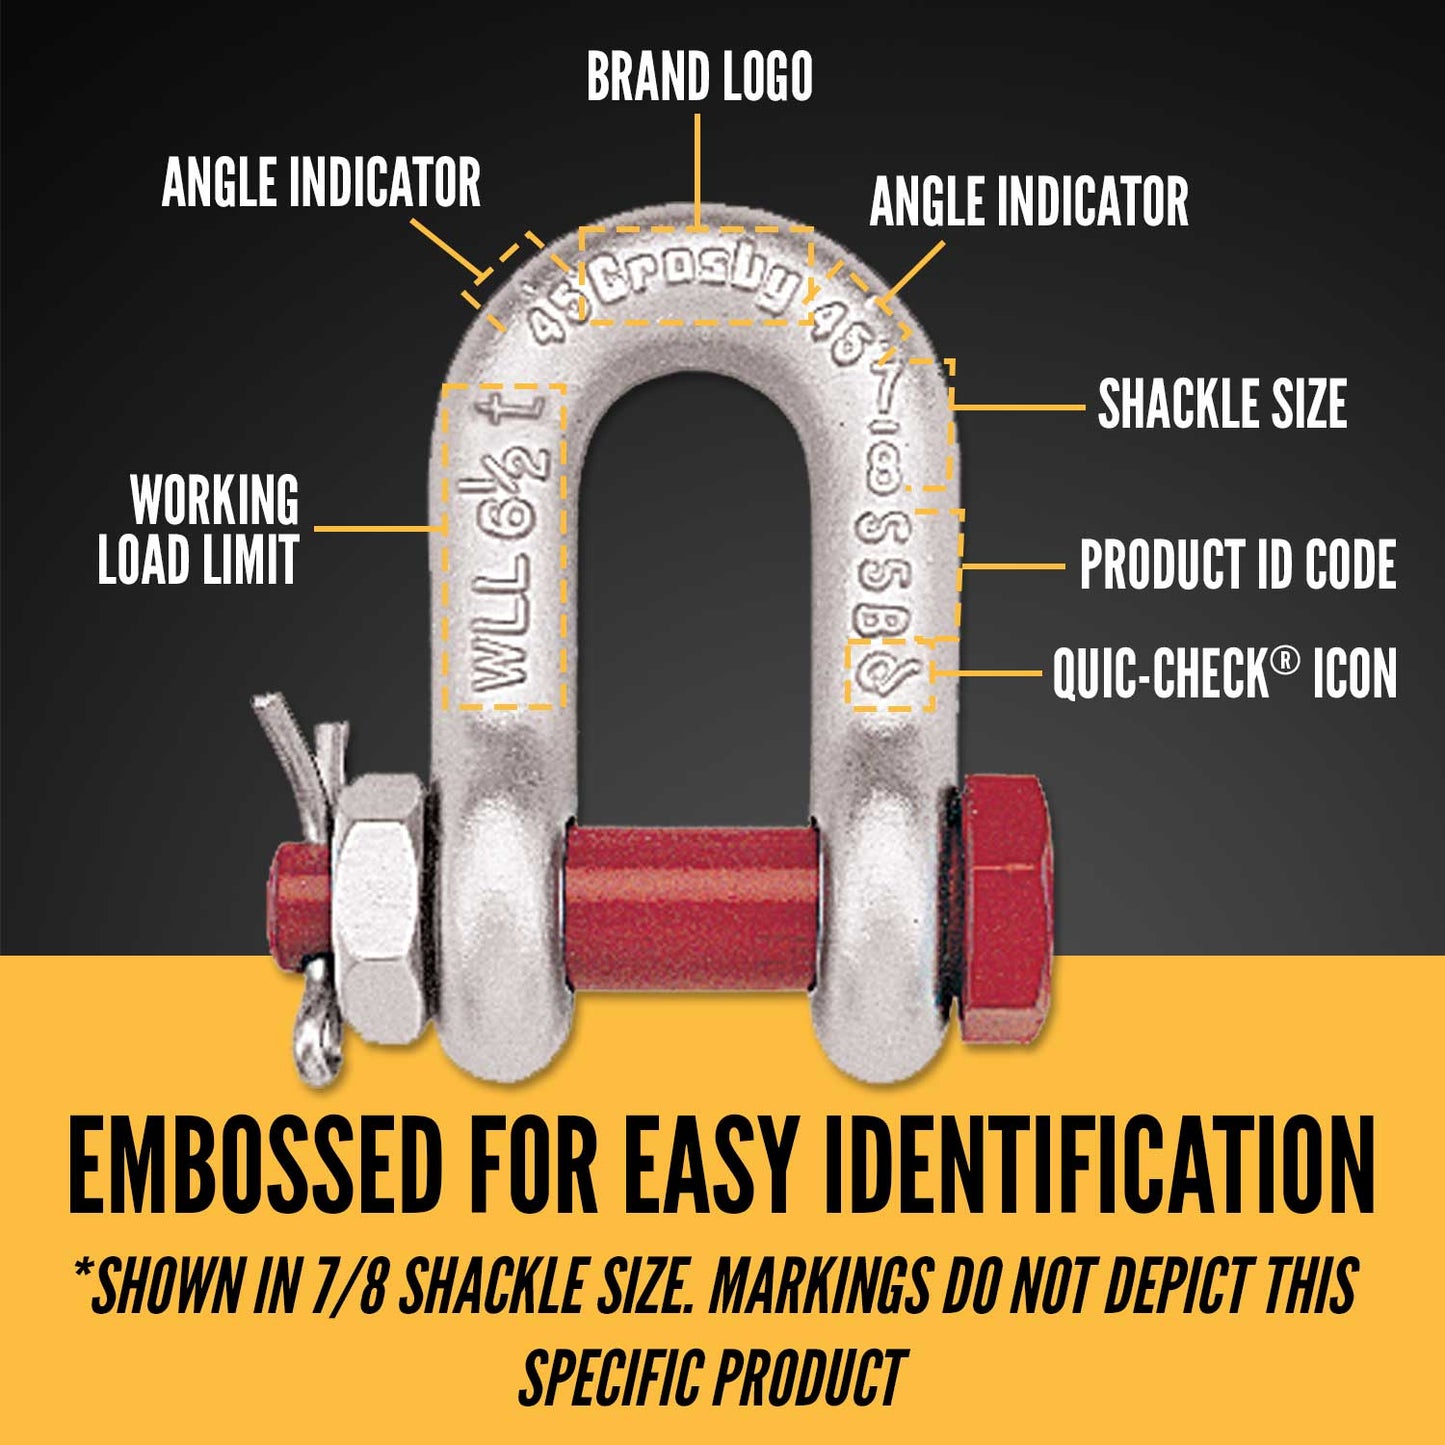 5/16" Crosby® Bolt Type Chain Shackle | G-2163 - 0.75 Ton embossed for easy identification